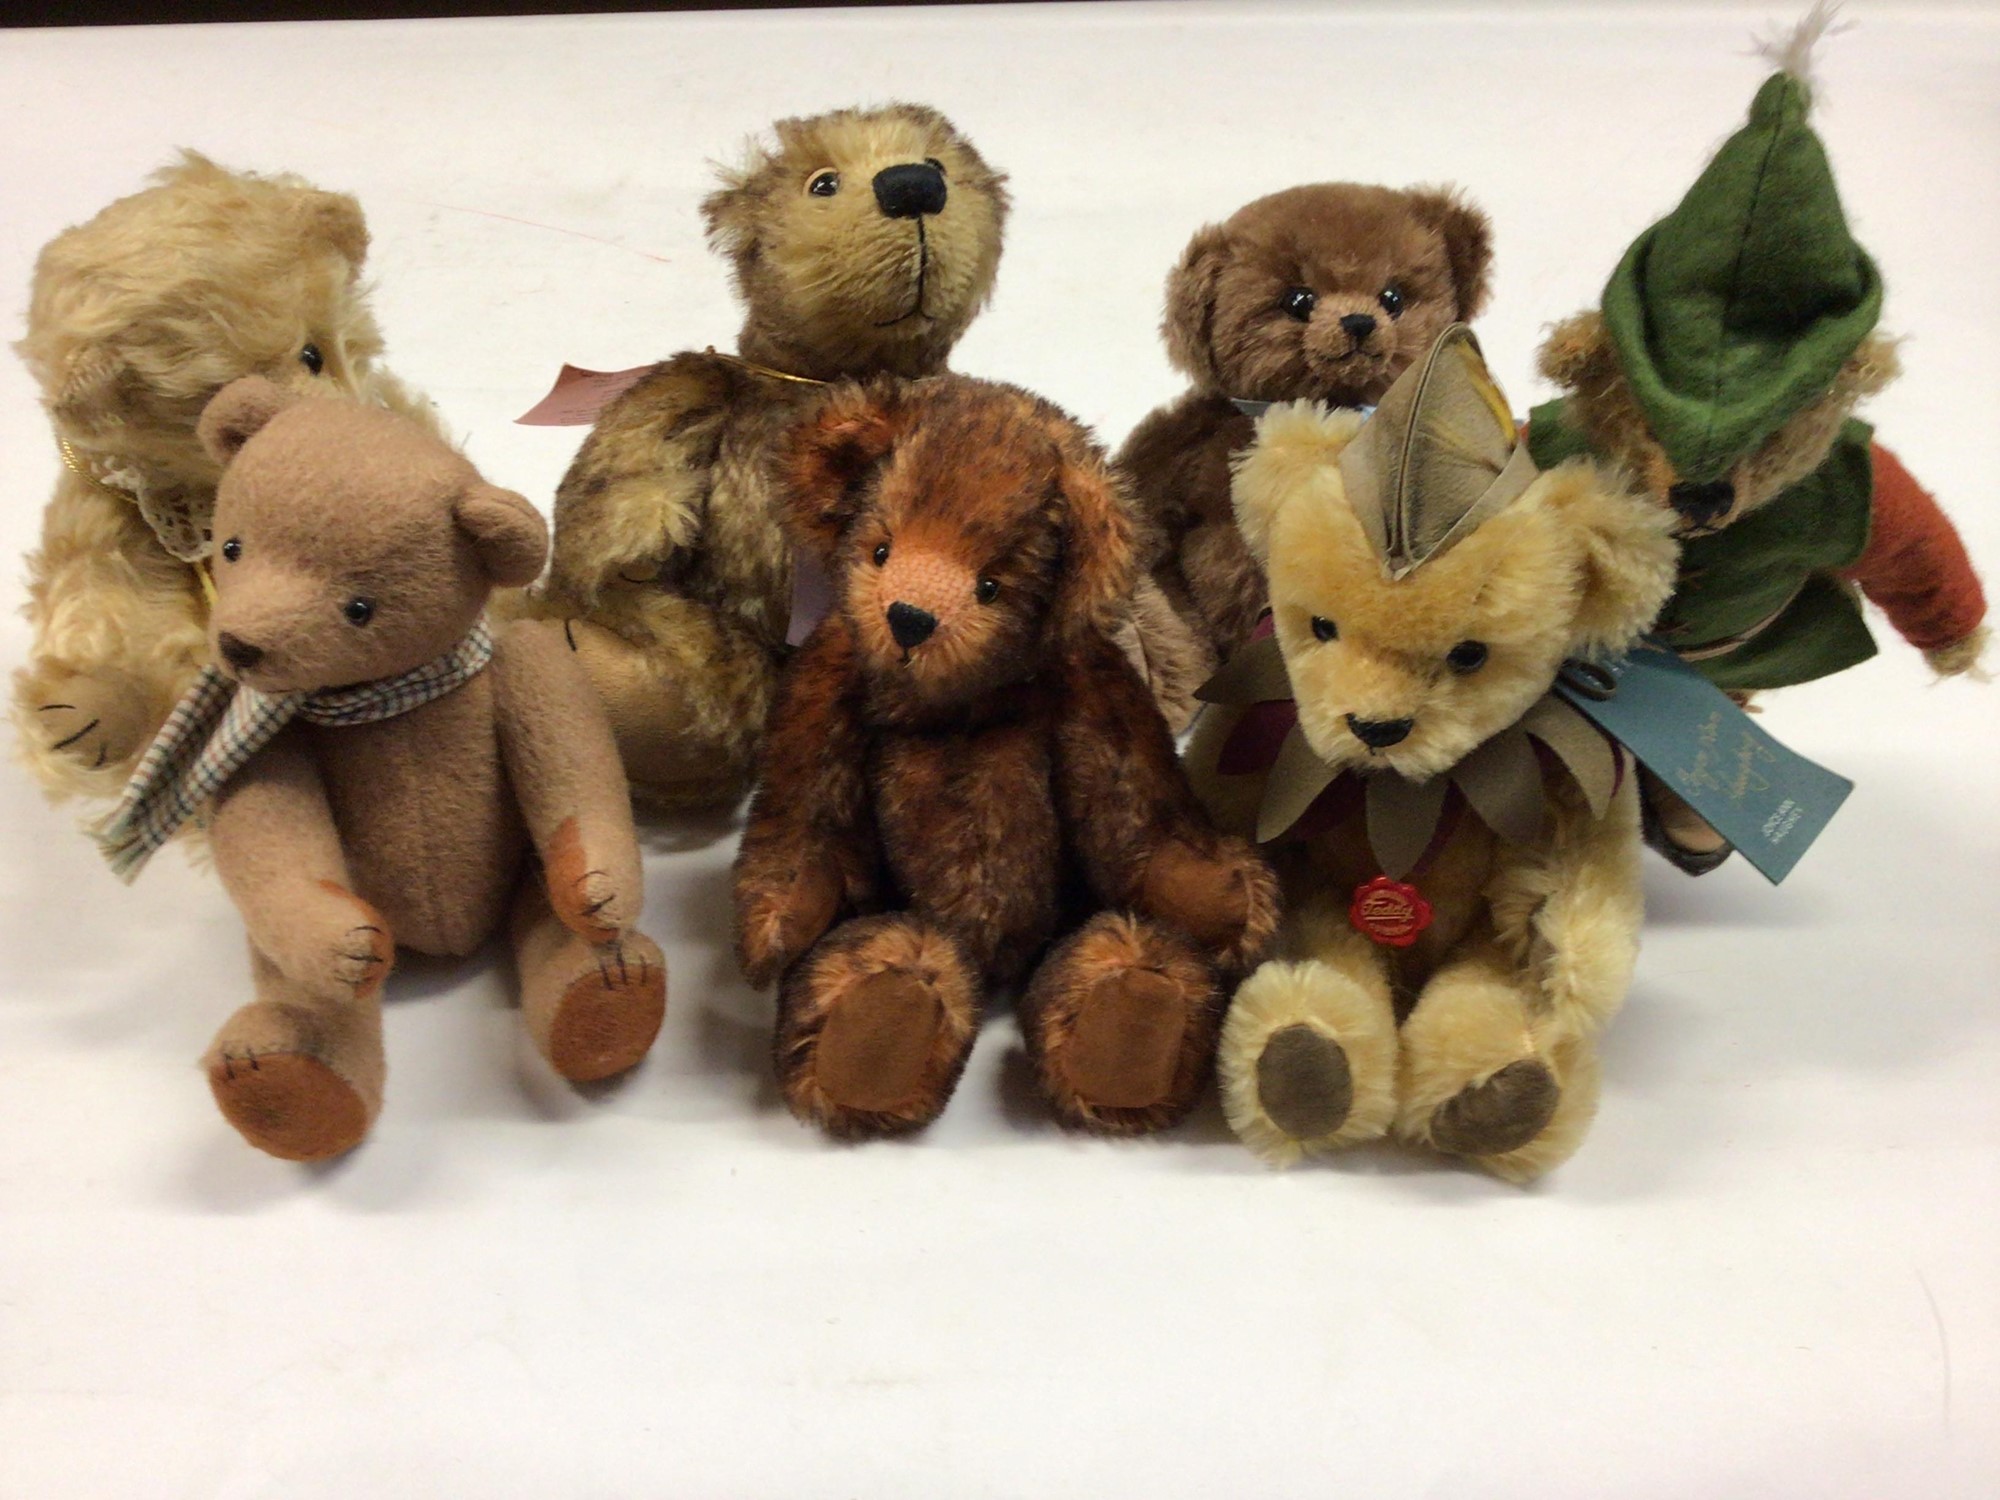 Mandicrafts News & Views - Teddy Bears & Collectibles: View-Master